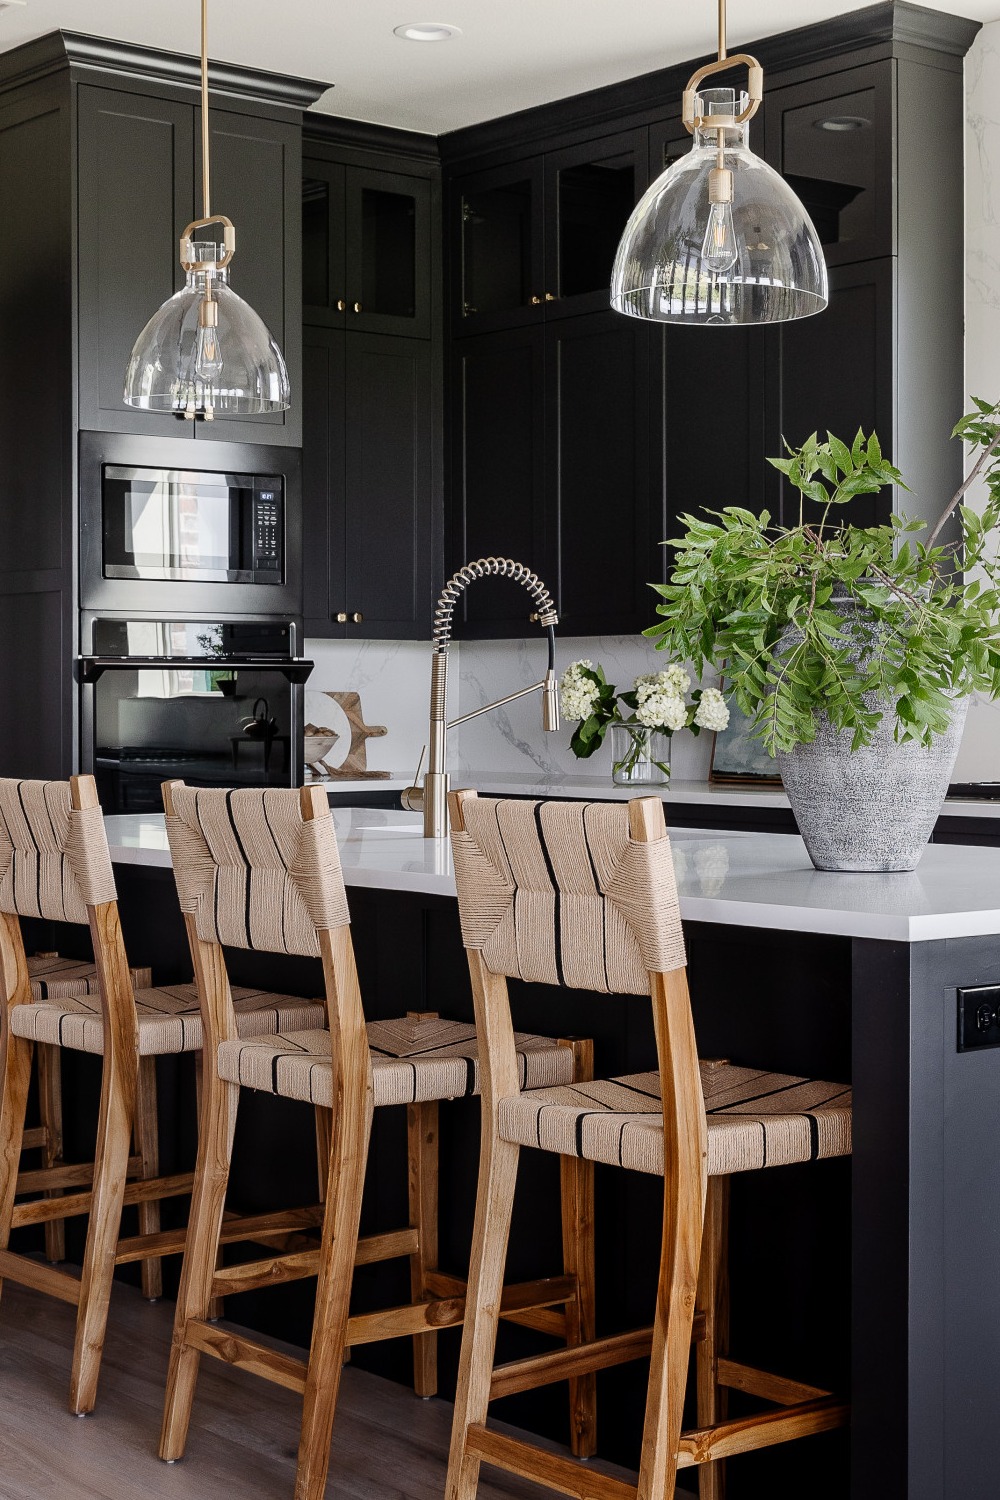 Black Raised Panel Cabinets Exposed Brick Wall Black Kitchen Cabinets Sophisticated Contrast